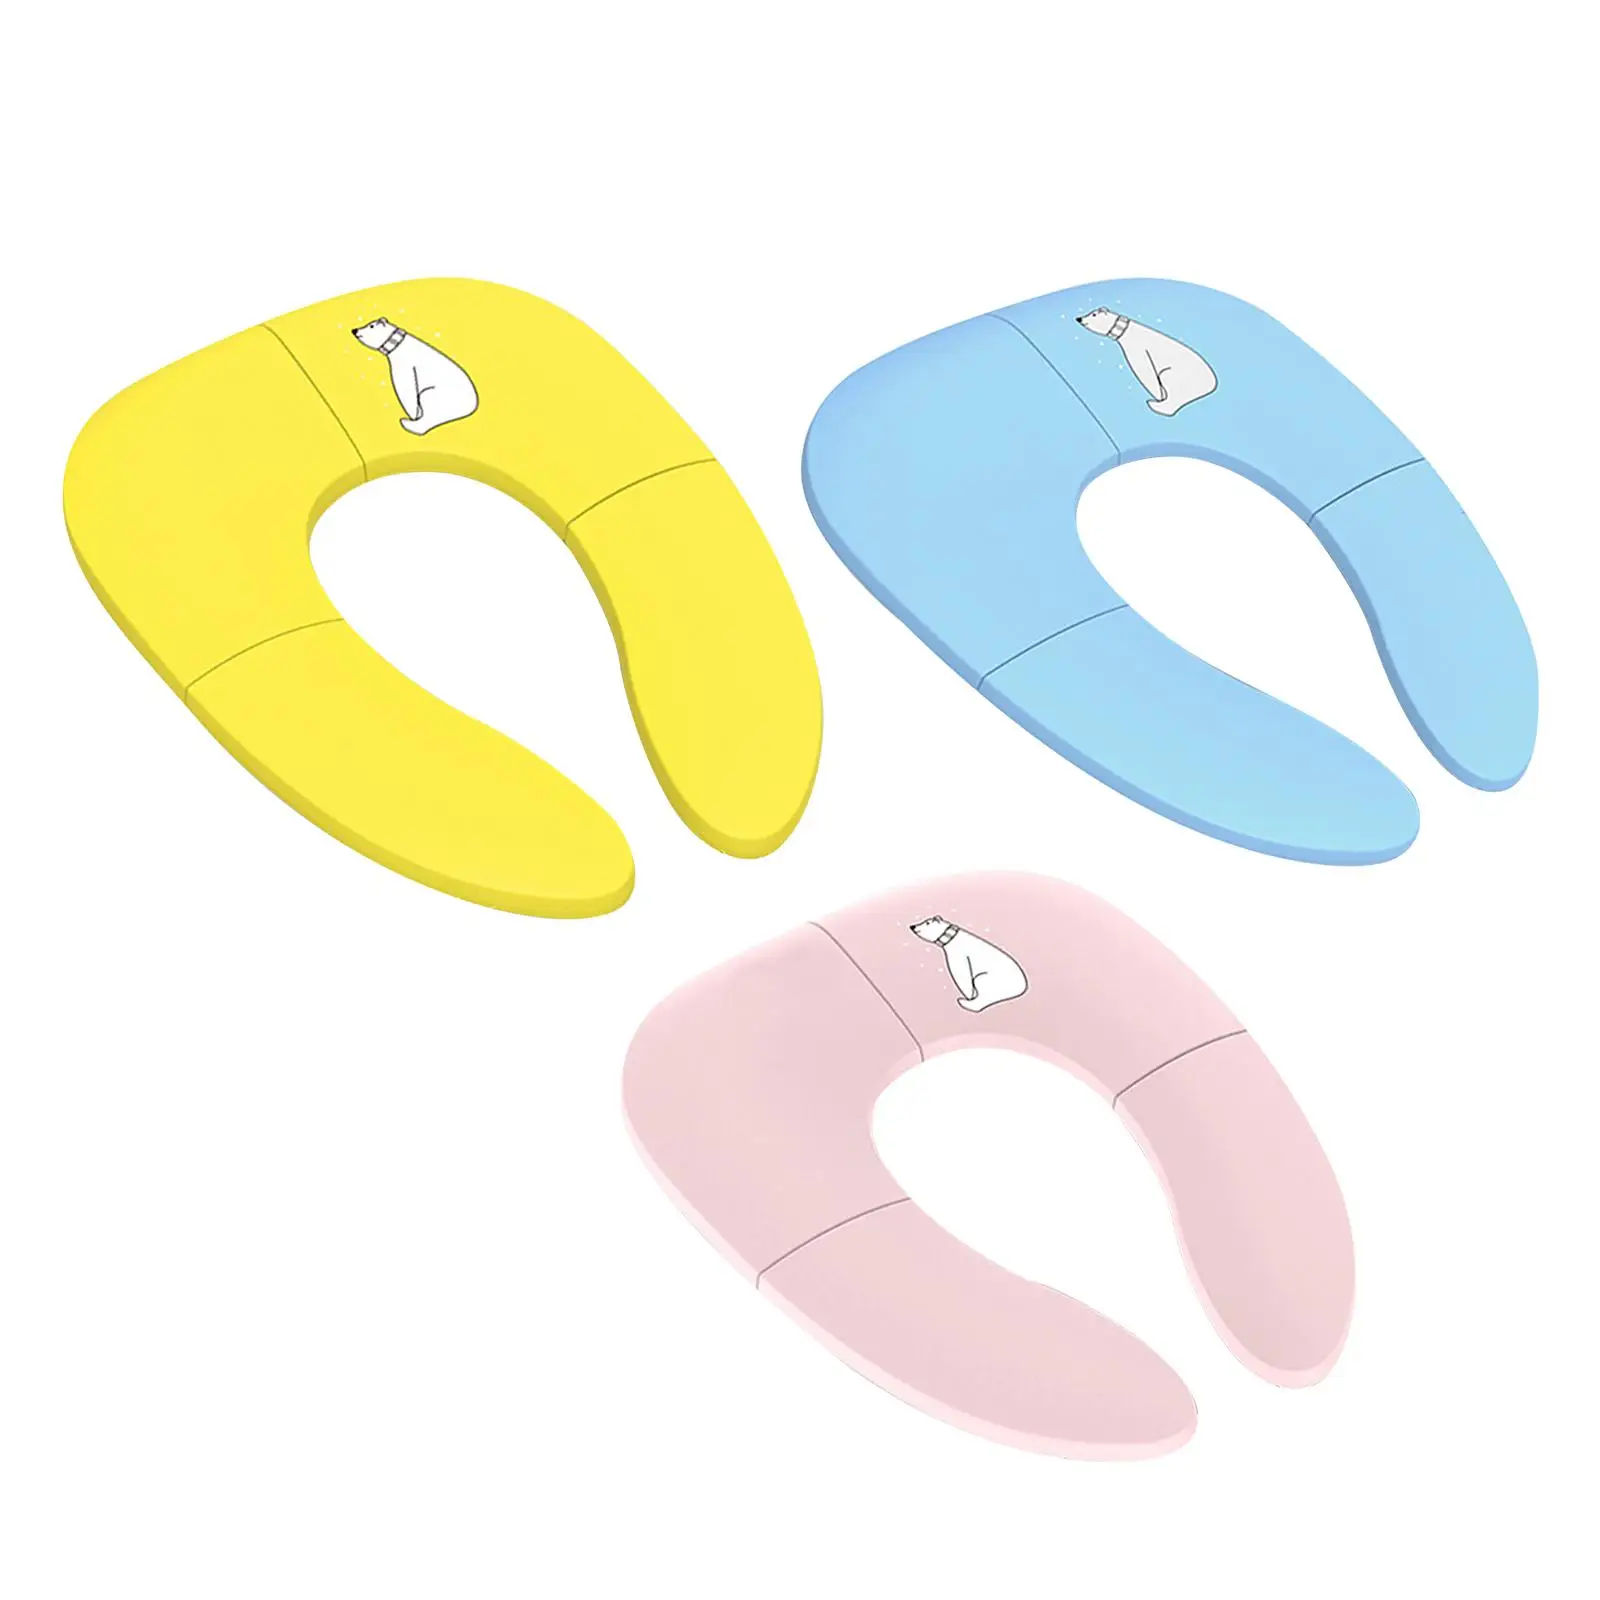 Folding Toilet Cushion training Seat Reusable Portable Toilet Ring Toilet Seat pad Toilet Cover for Home Use